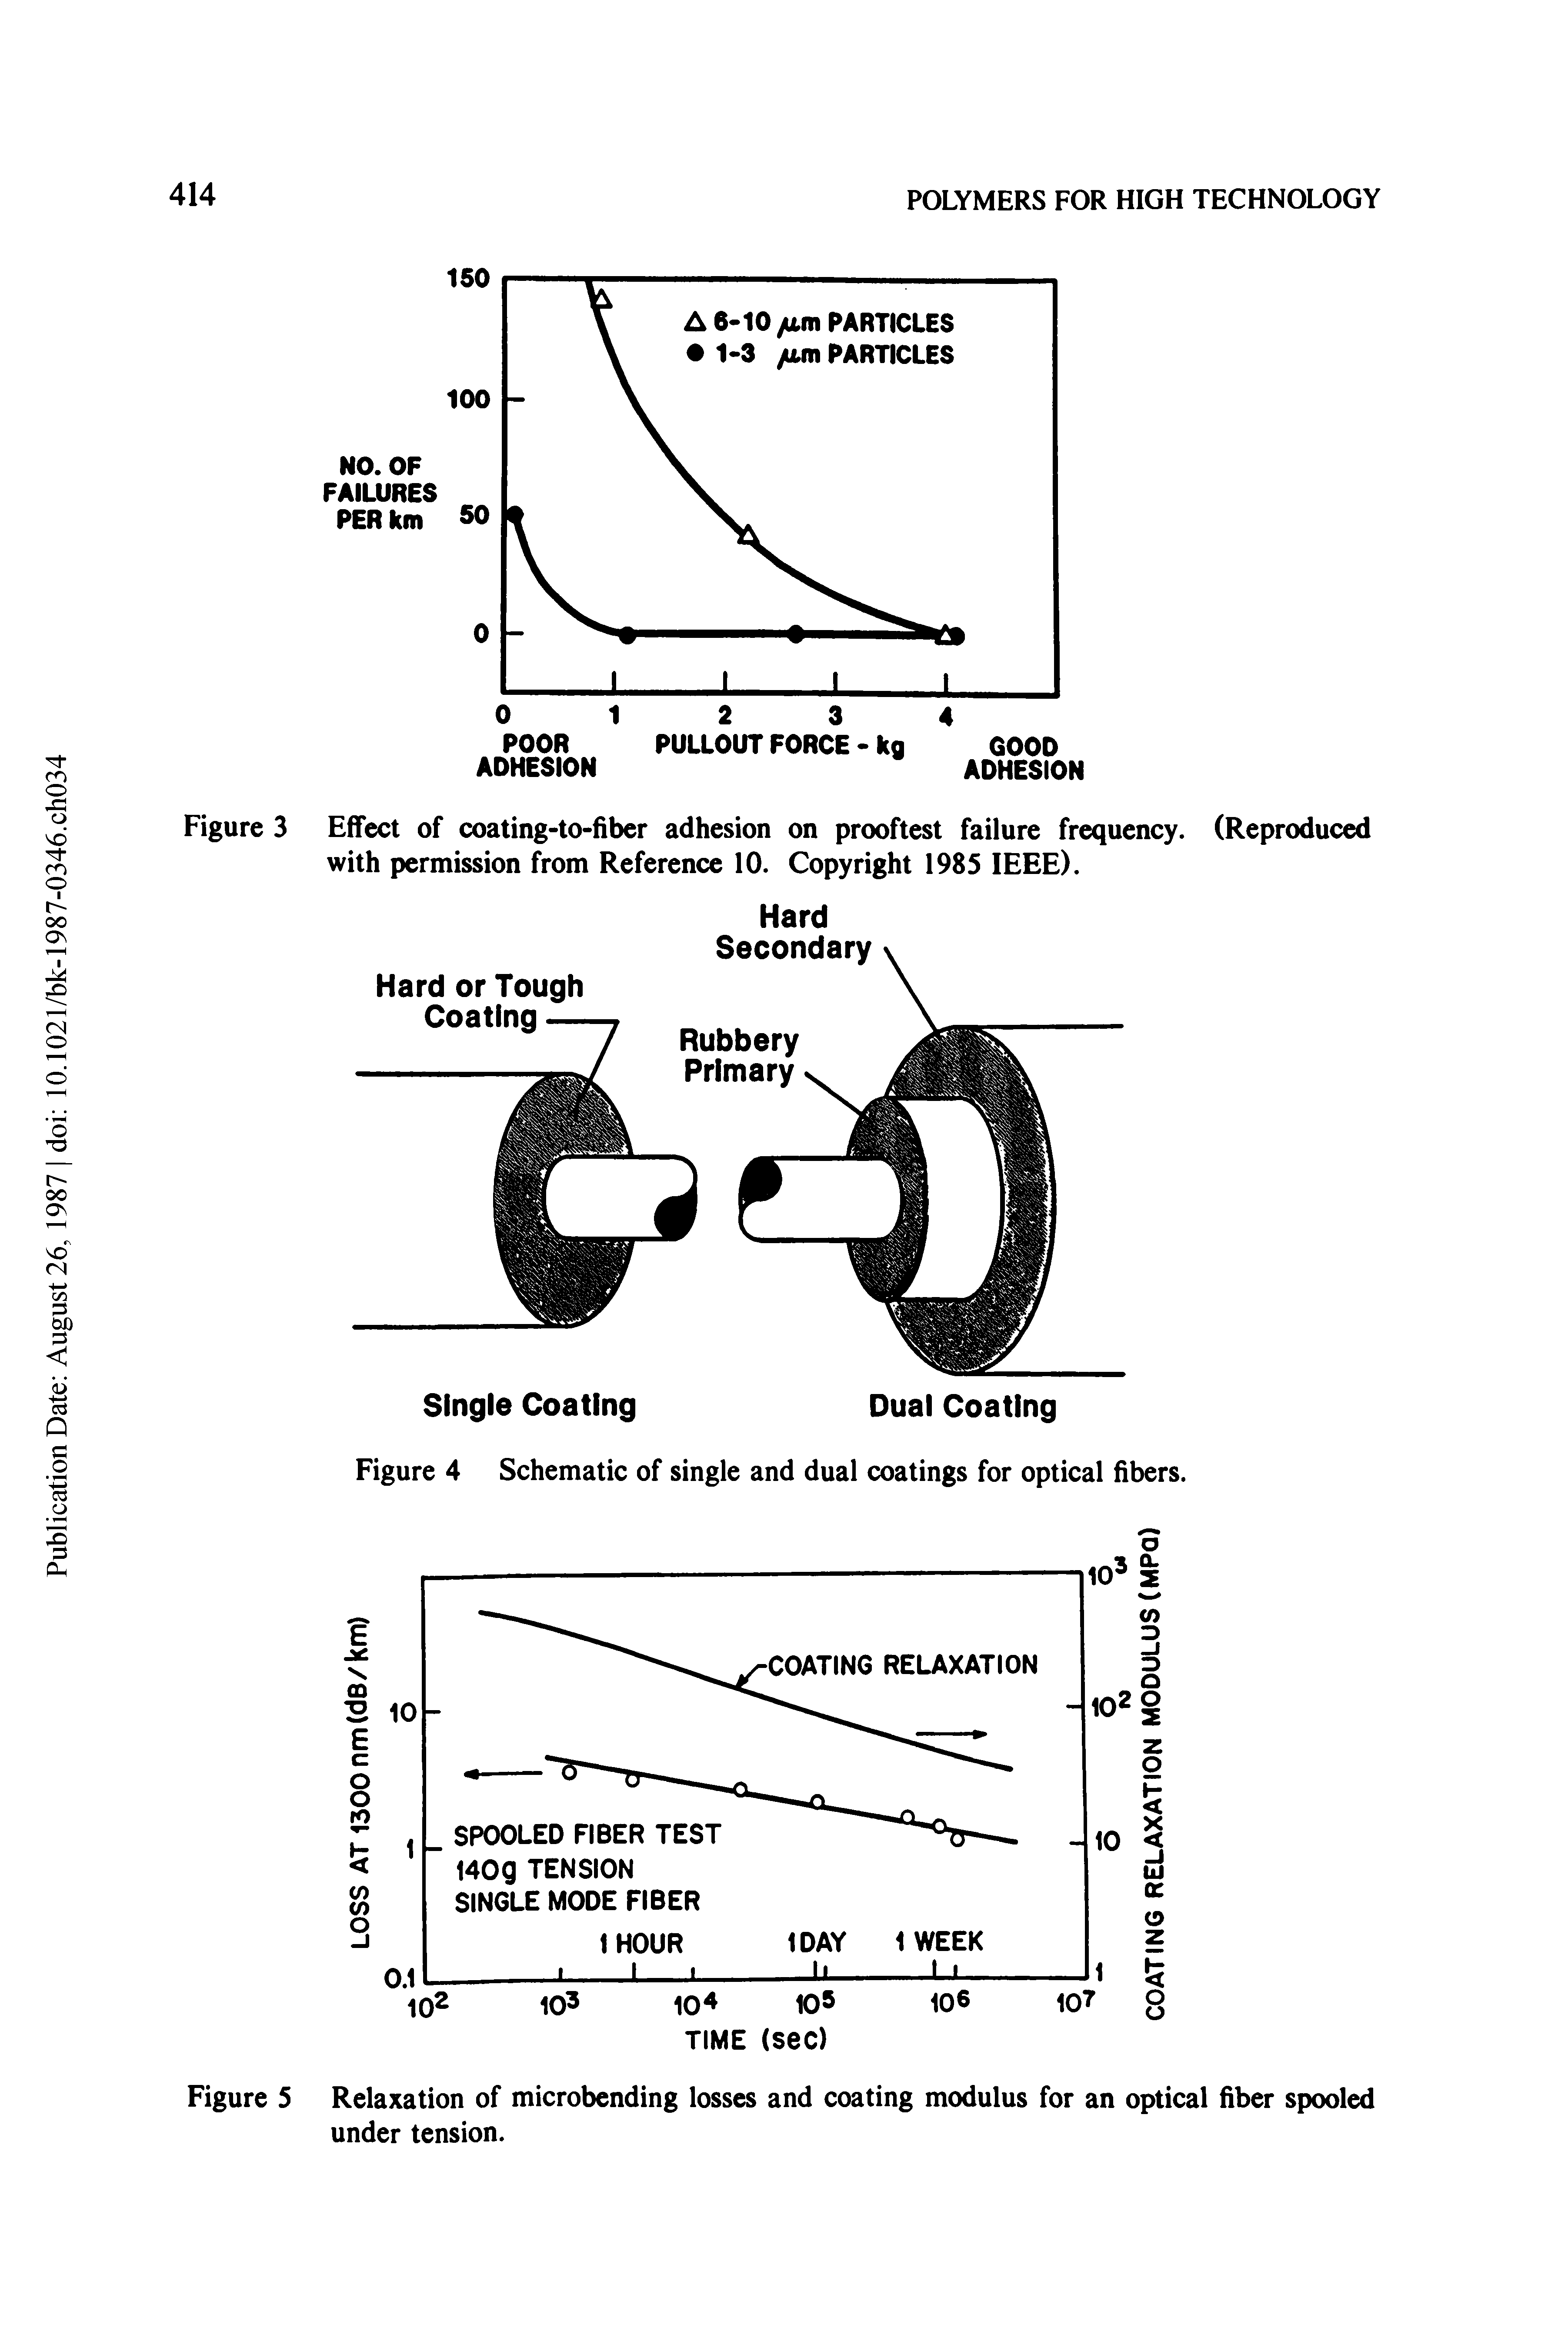 Figure 5 Relaxation of microbending losses and coating modulus for an optical fiber spooled under tension.